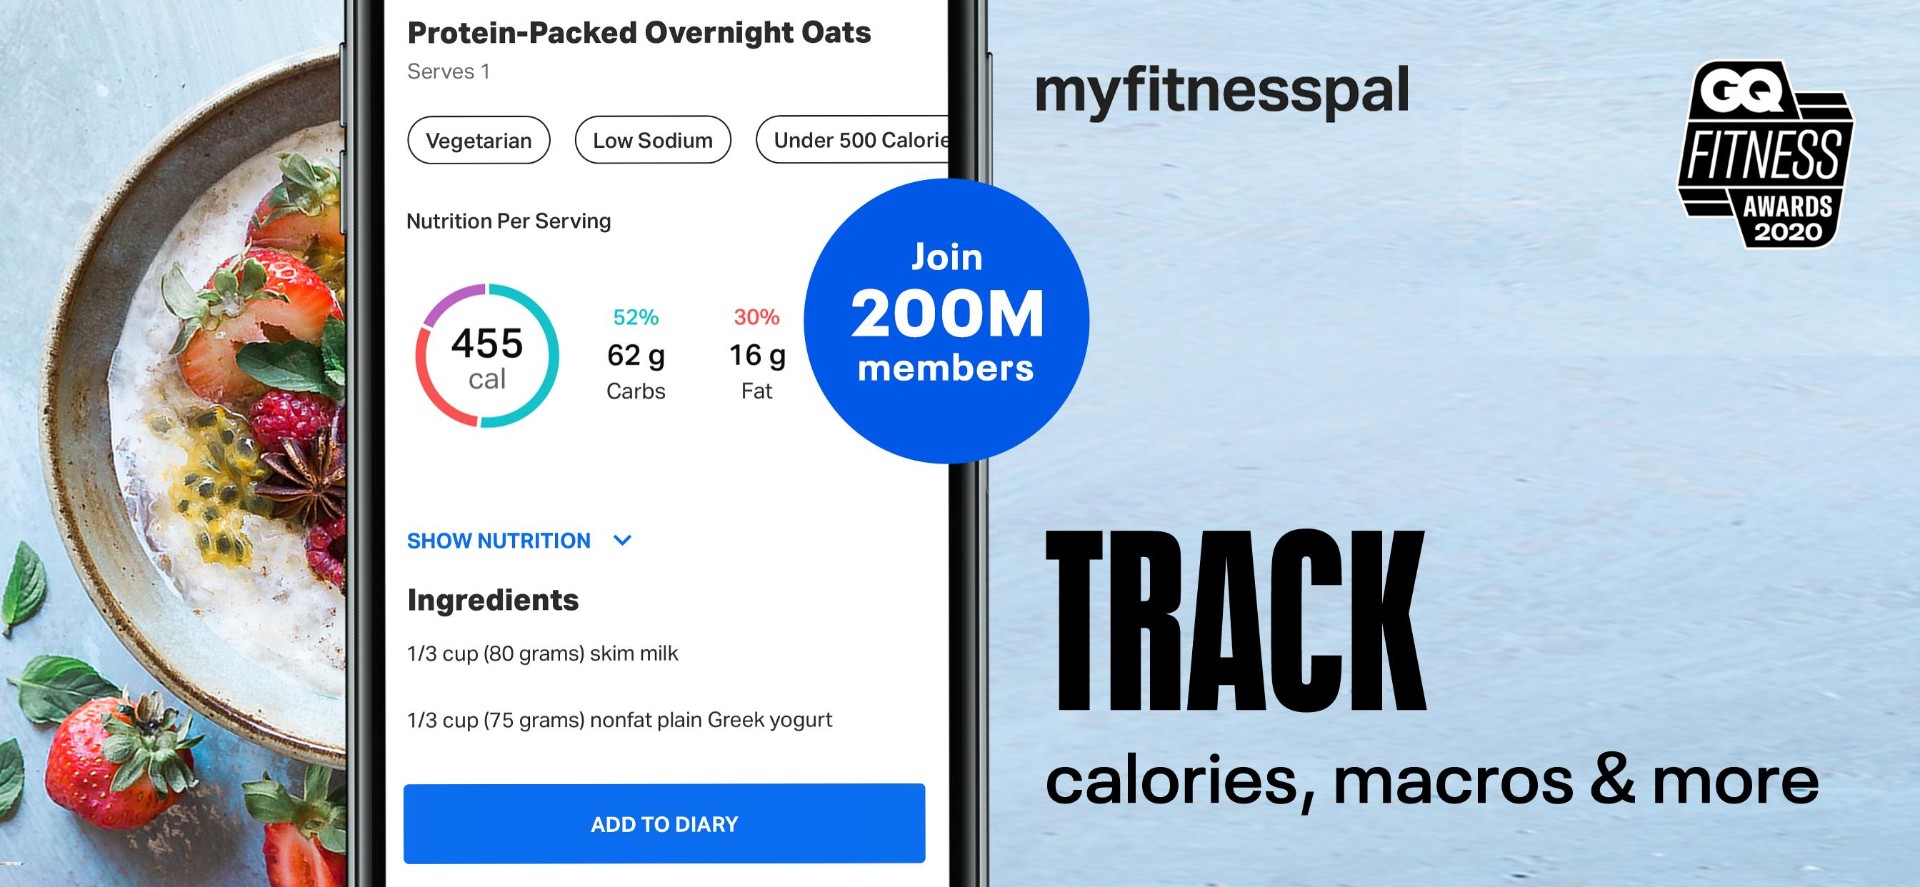 Discover How to Change Habits with the Calorie Counter App